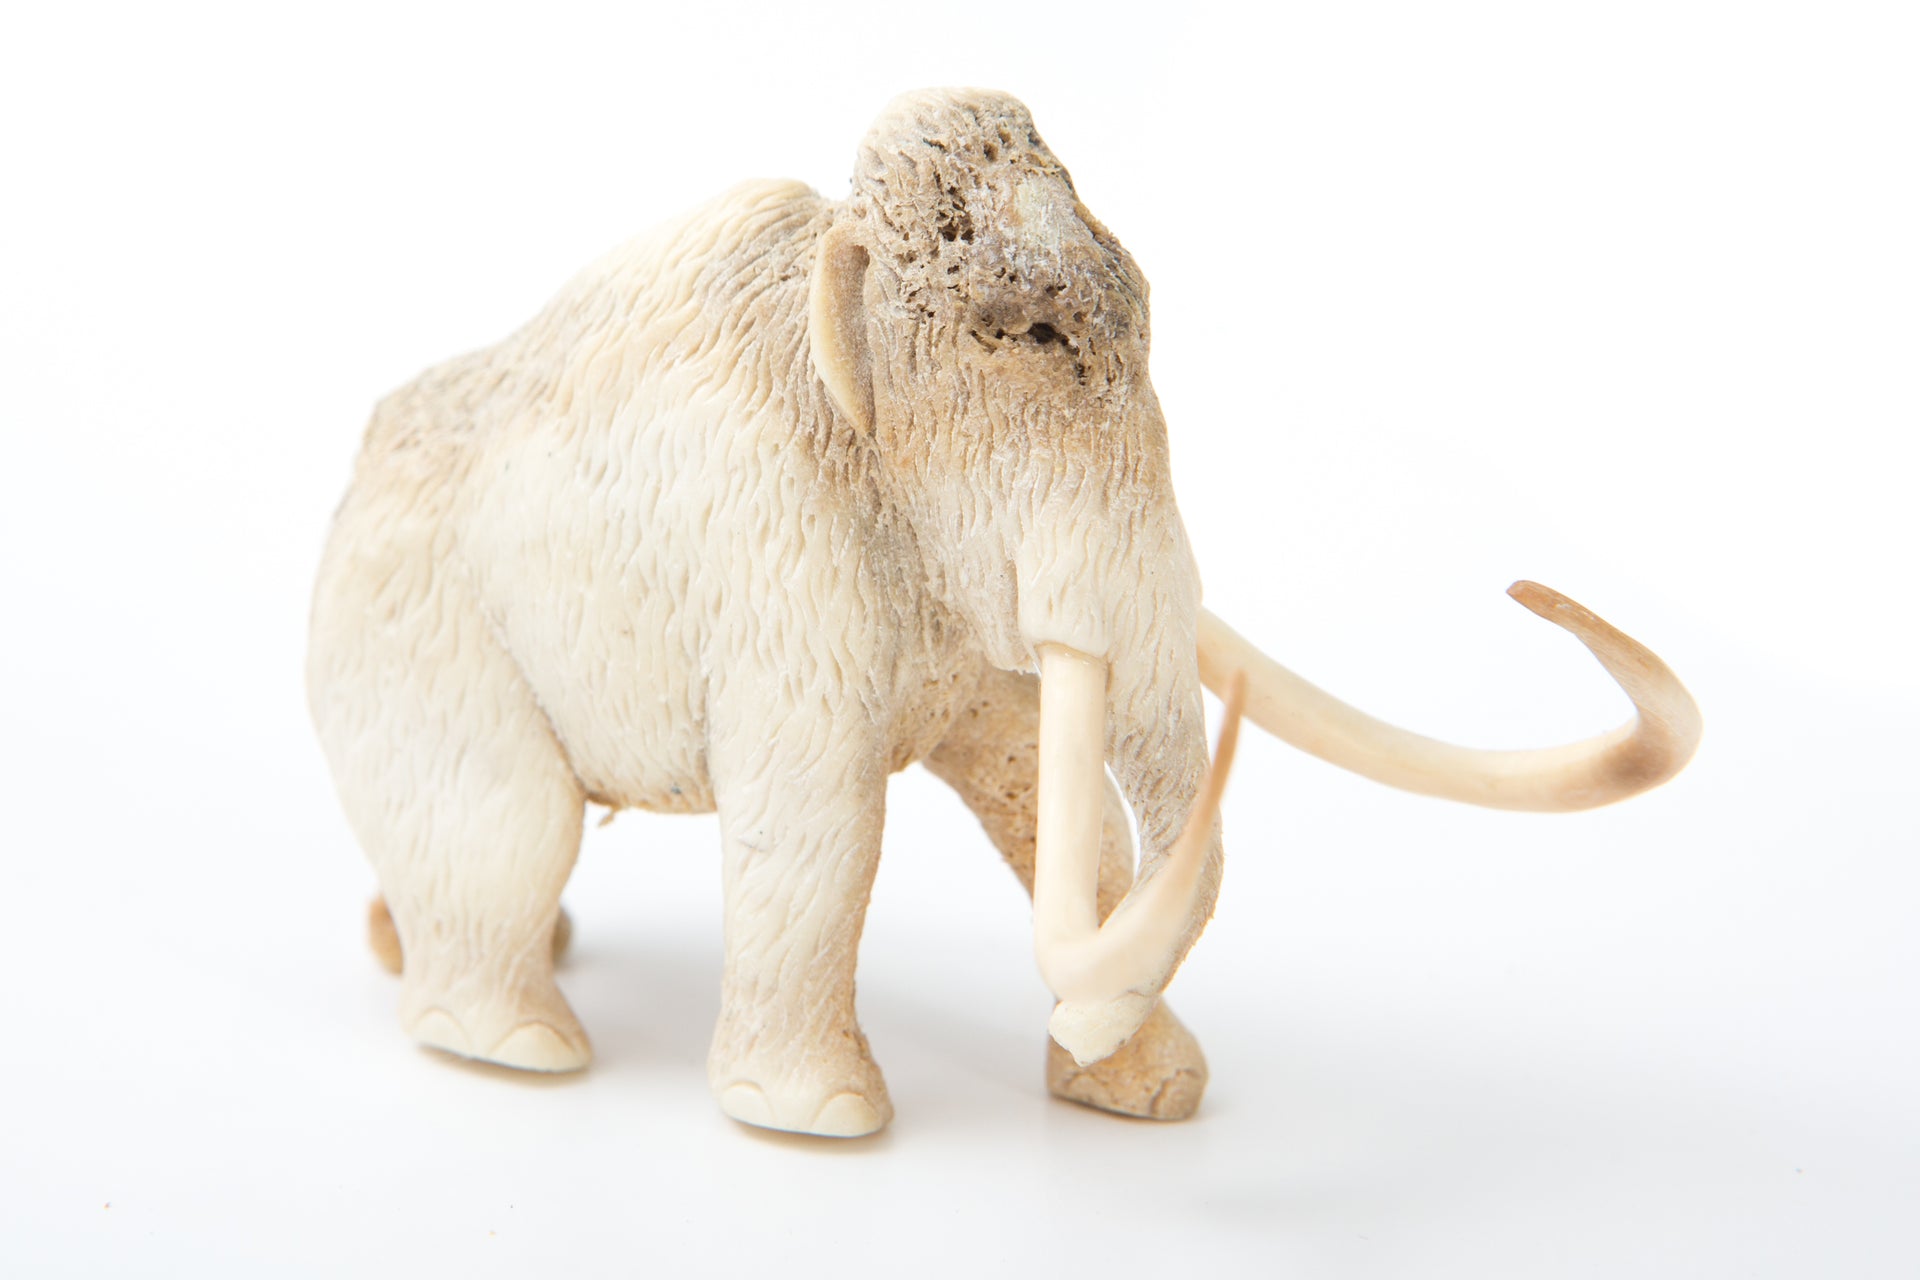 Carved mammoth